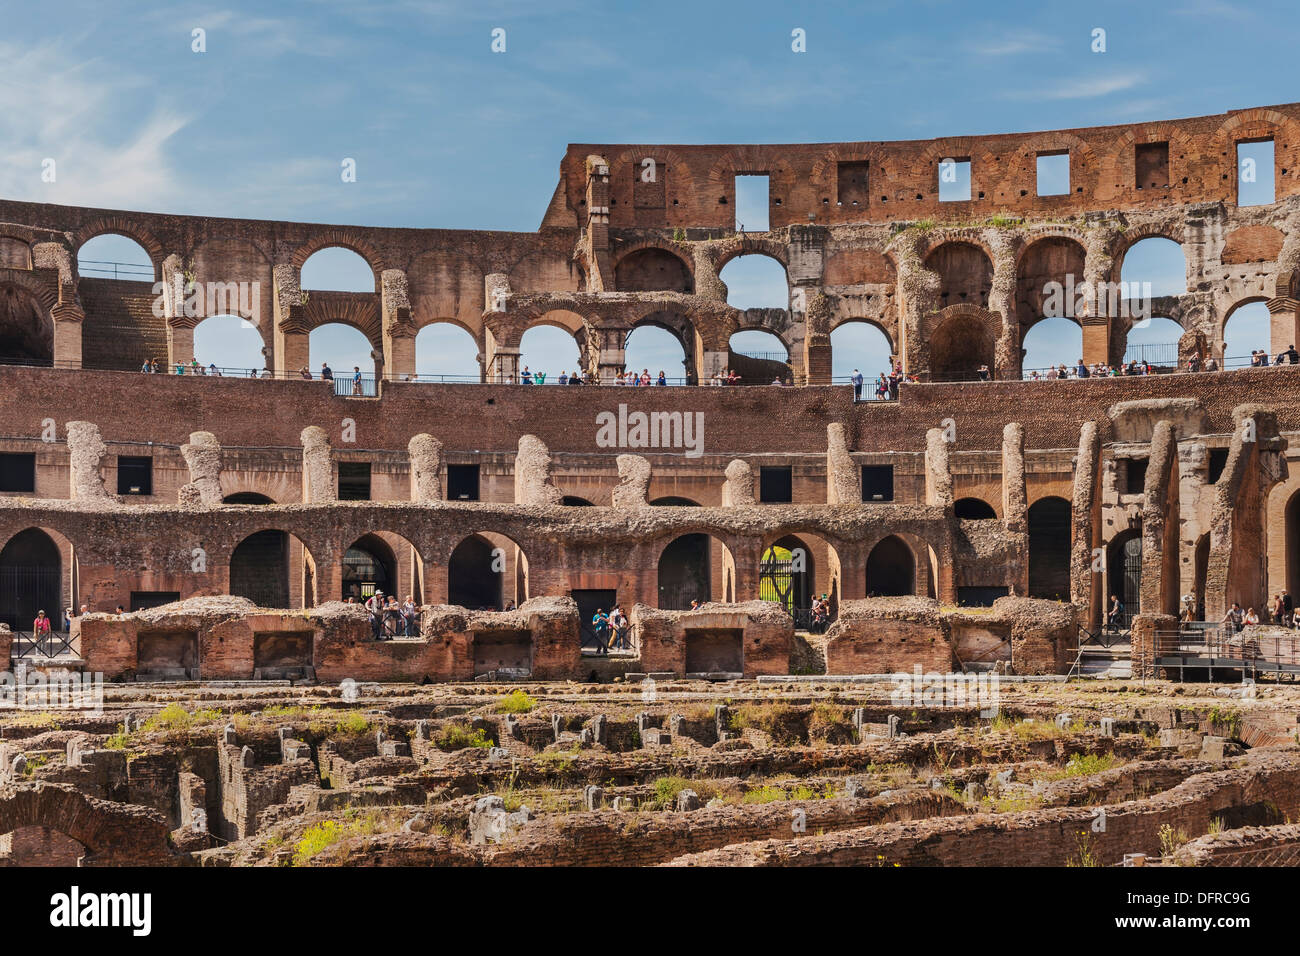 Interior view of the Colosseum, largest amphitheater in ancient Rome. It was built from 72 to 80 AD, Rome, Lazio, Italy, Europe Stock Photo